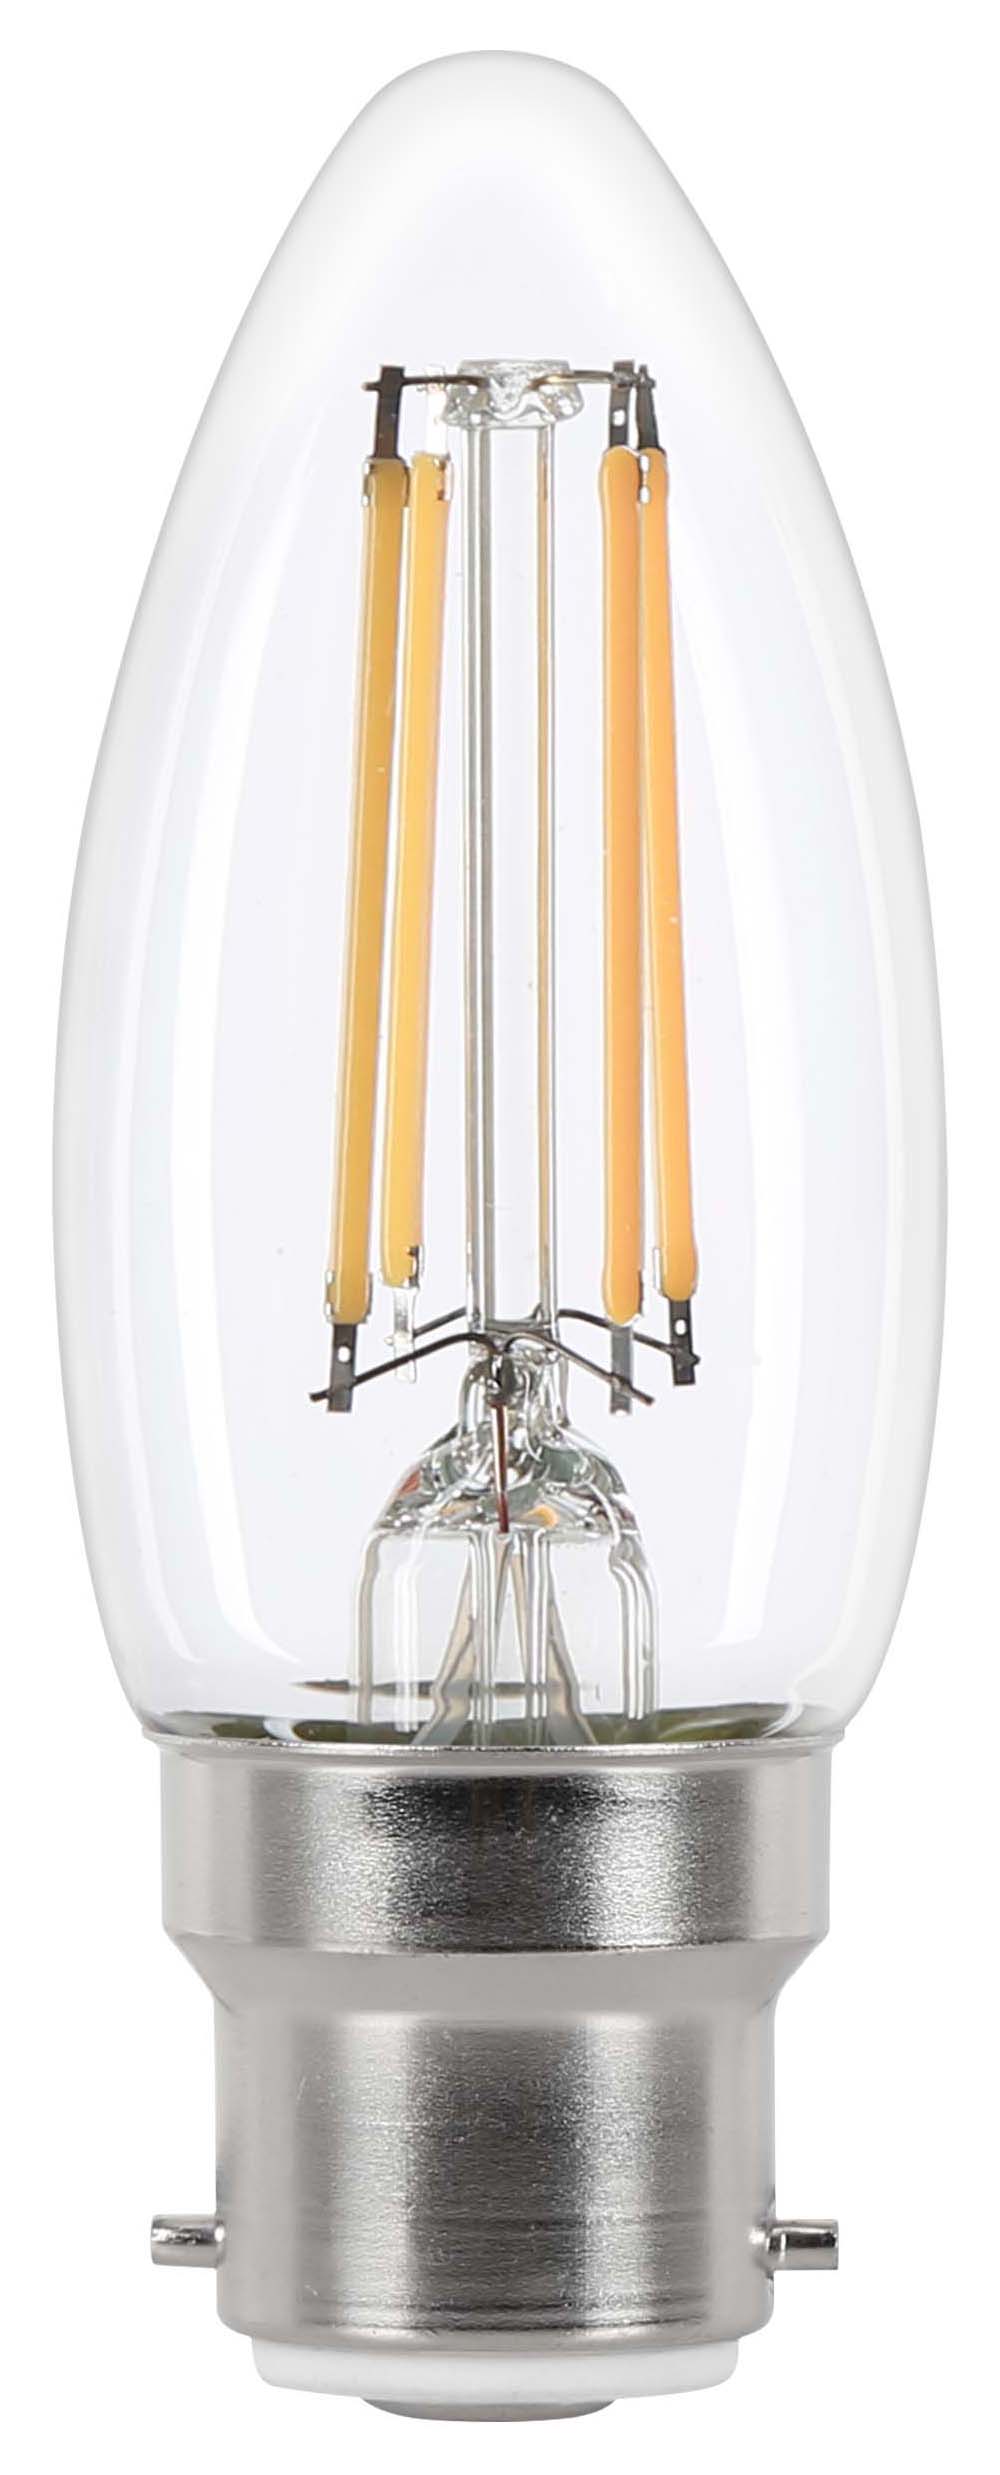 Image of Wickes Non-Dimmable Filament B22 Candle 3.4W Warm White Light Bulb